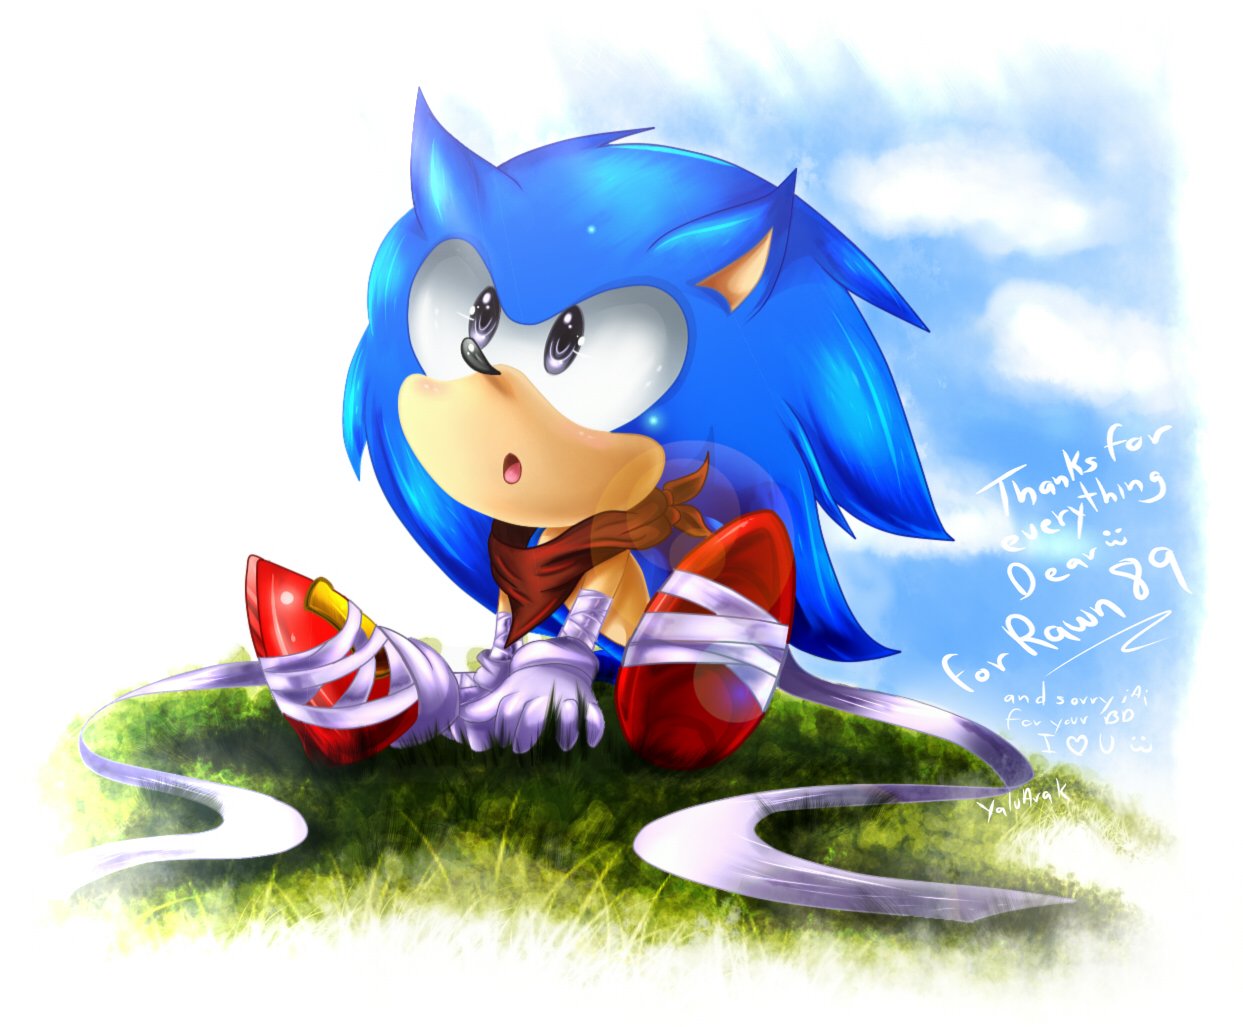 can_i_be_in_sonic_boom gift_for_rawn89 by_yaluarak-d7t6qf8.jpg.